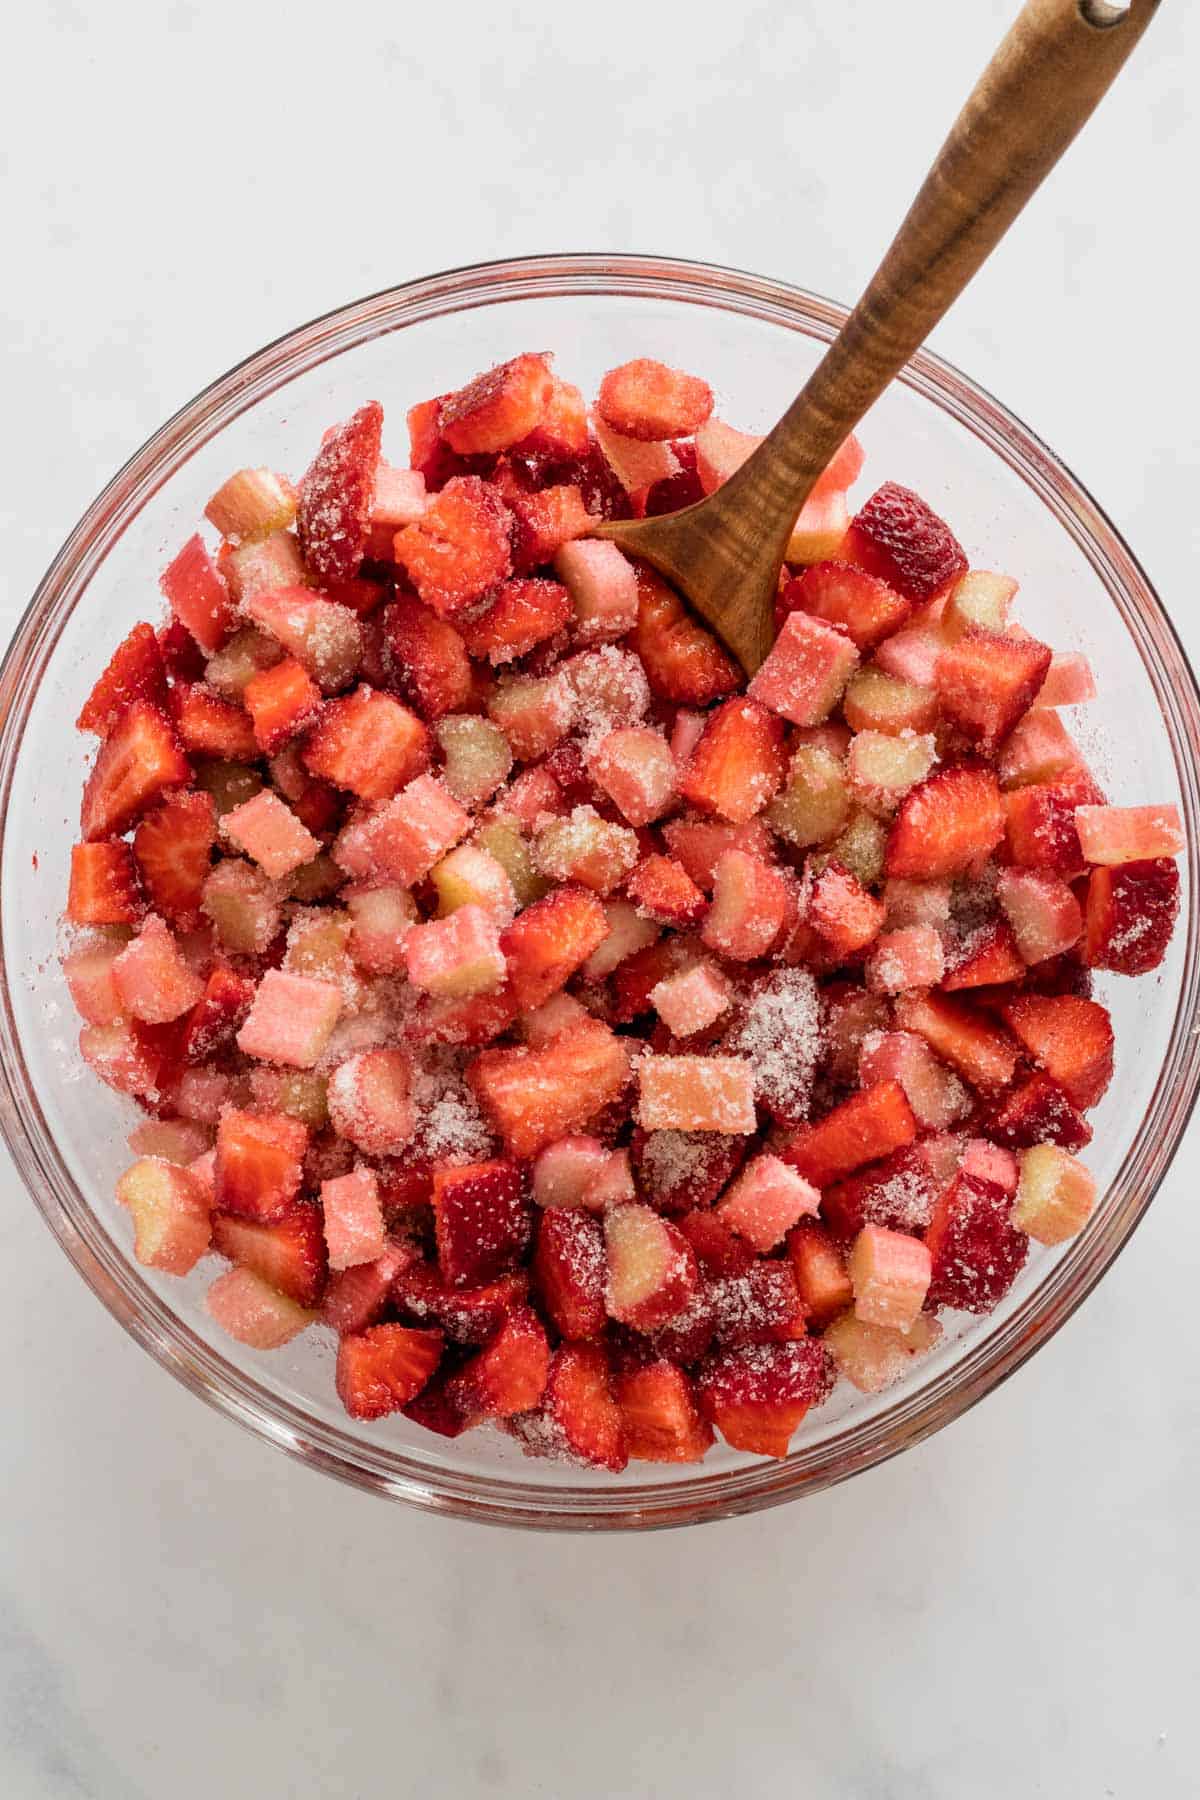 diced strawberries and rhubarb in mixing bowl with sugar and lemon